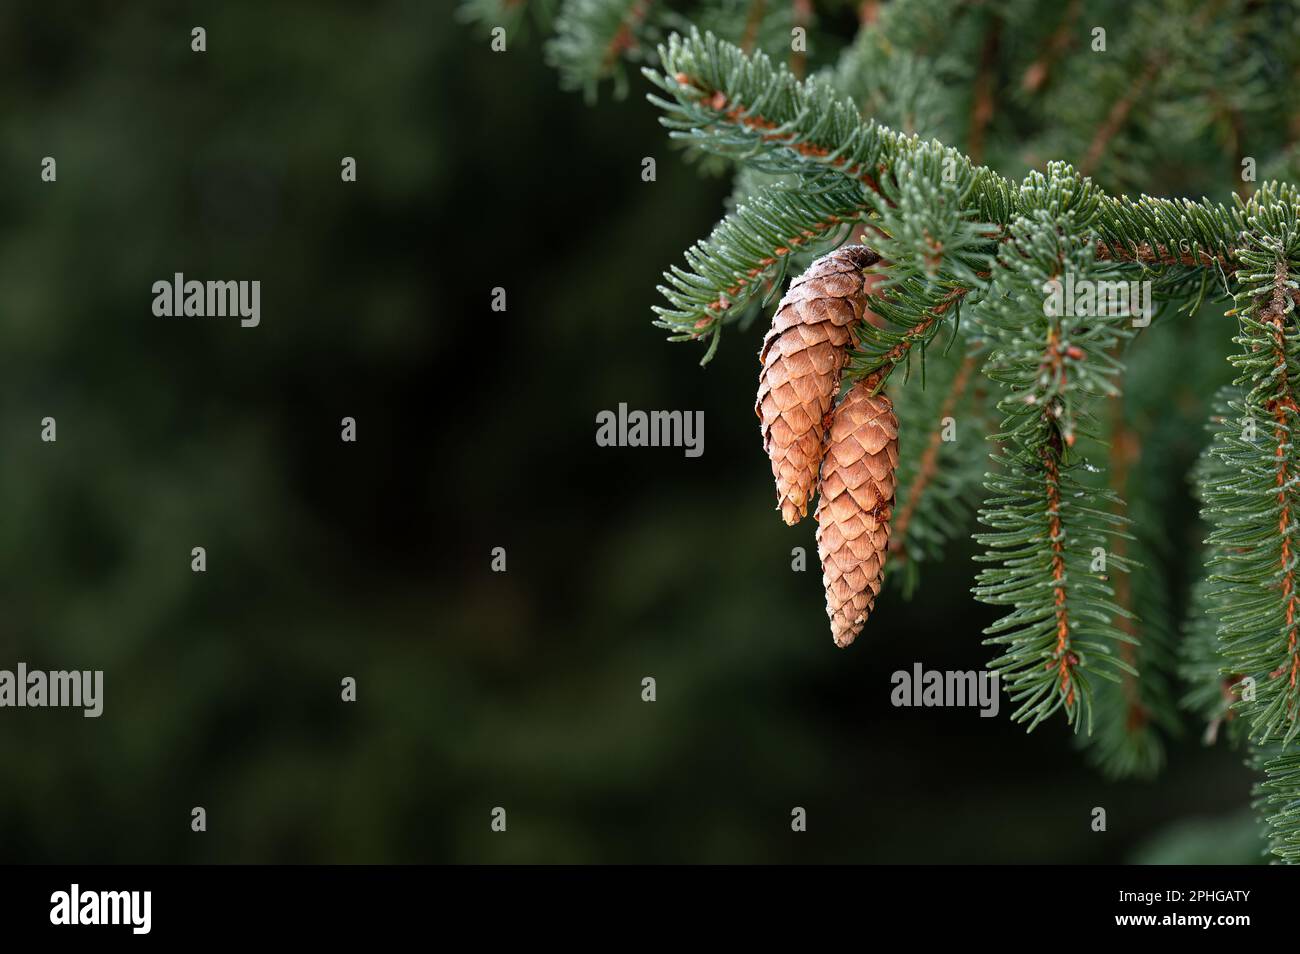 European spruce aka Norway spruce, Picea abies, cones hanging from branch. Stock Photo